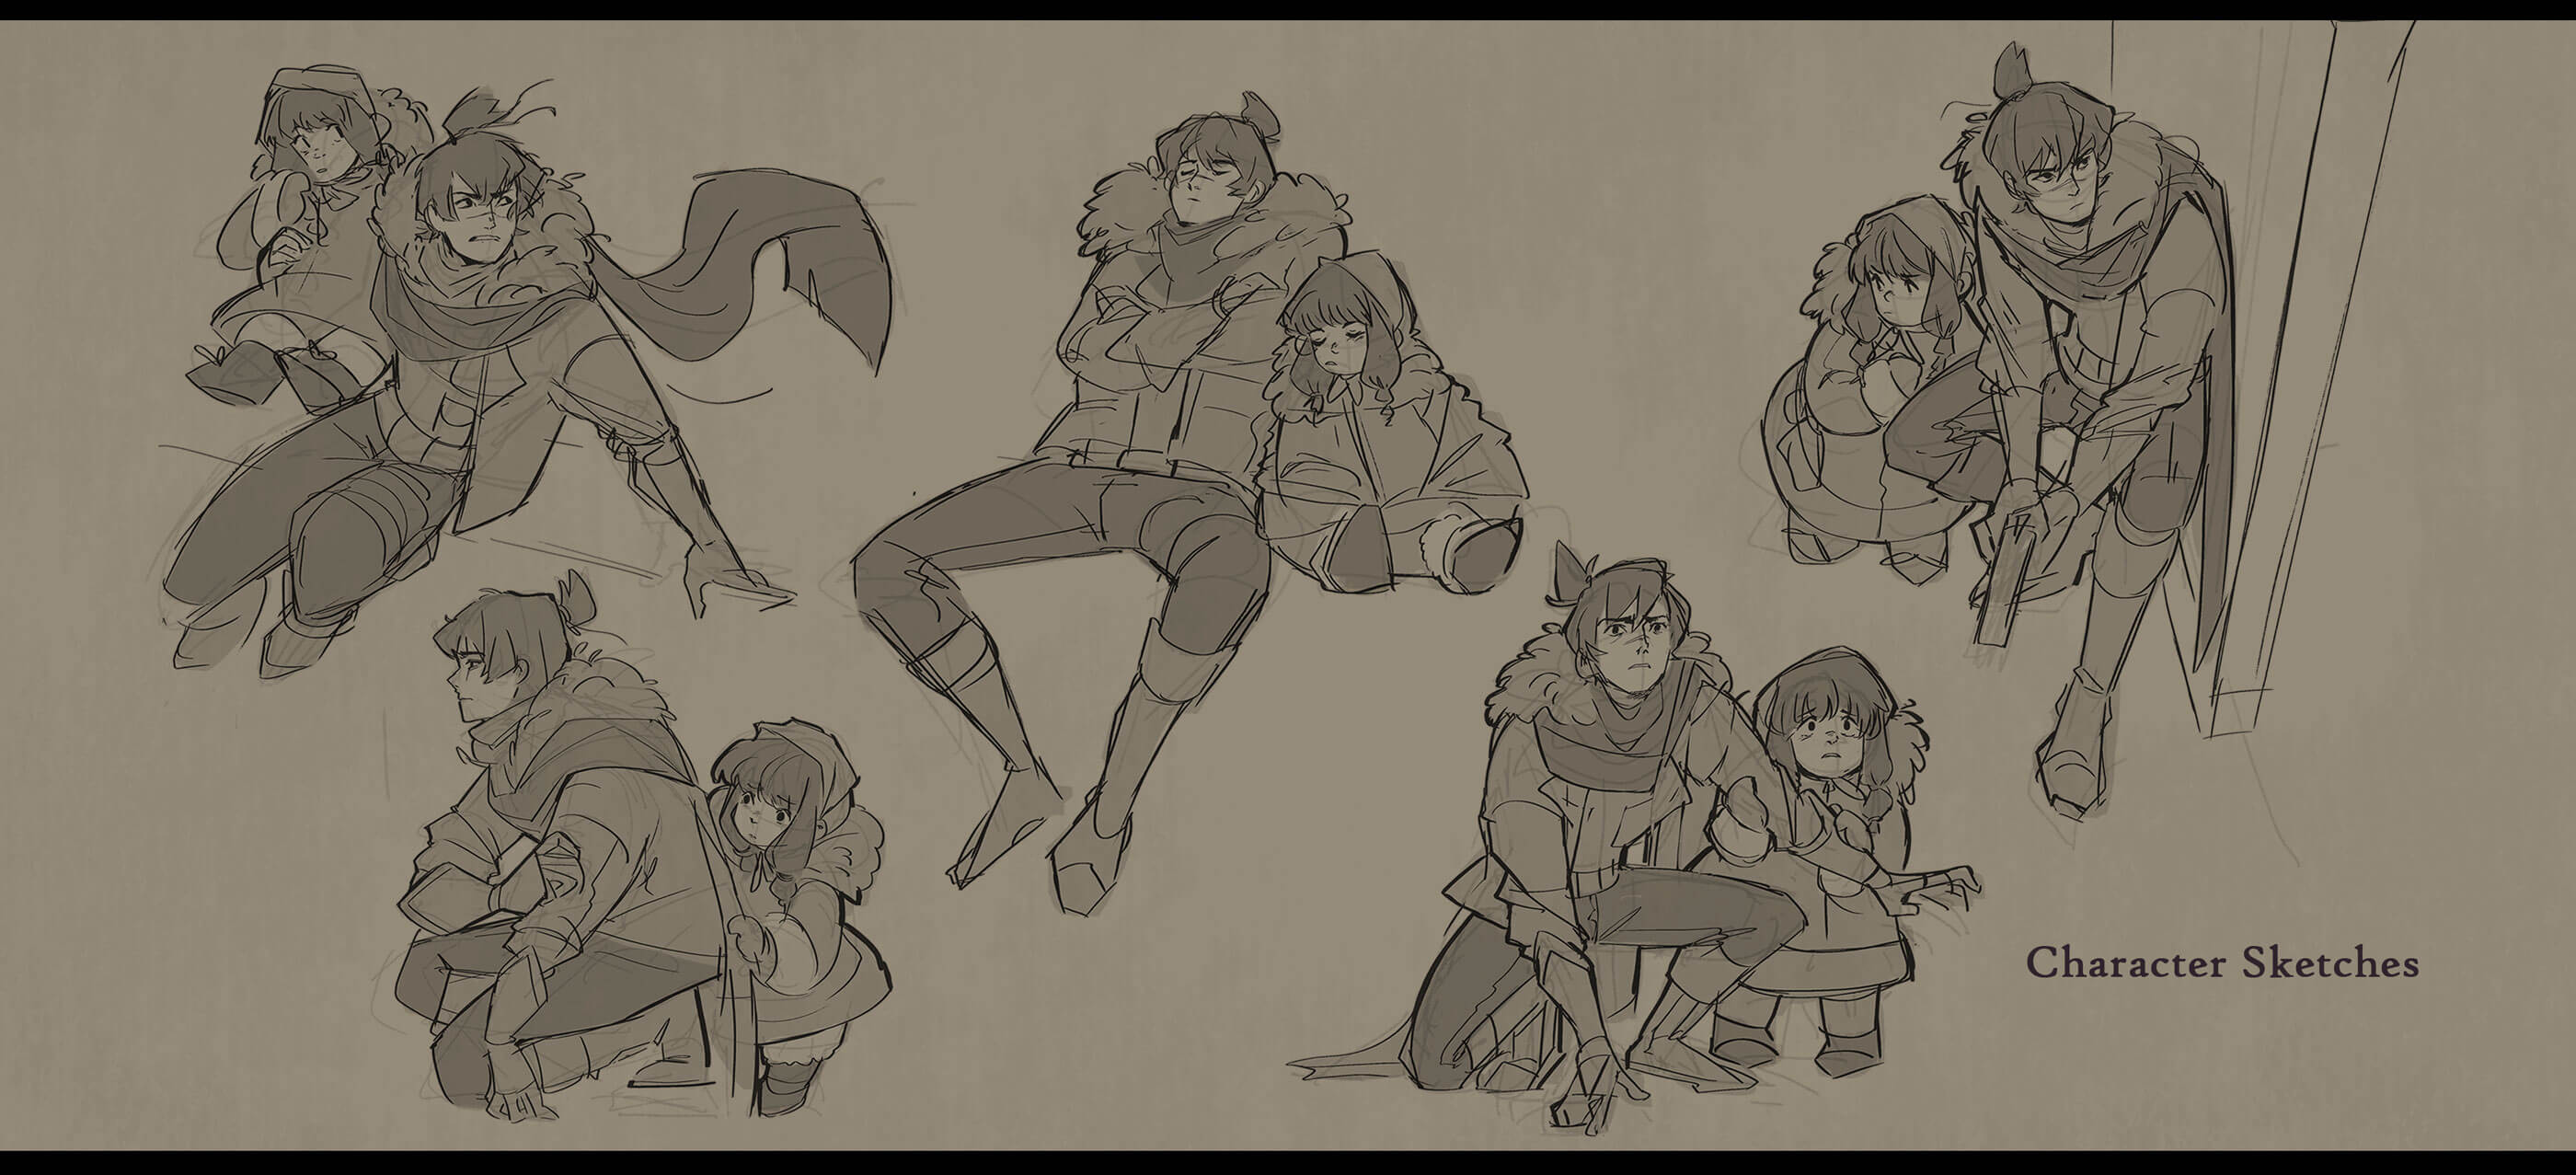 Sketched concept images of a man protecting a little girl.